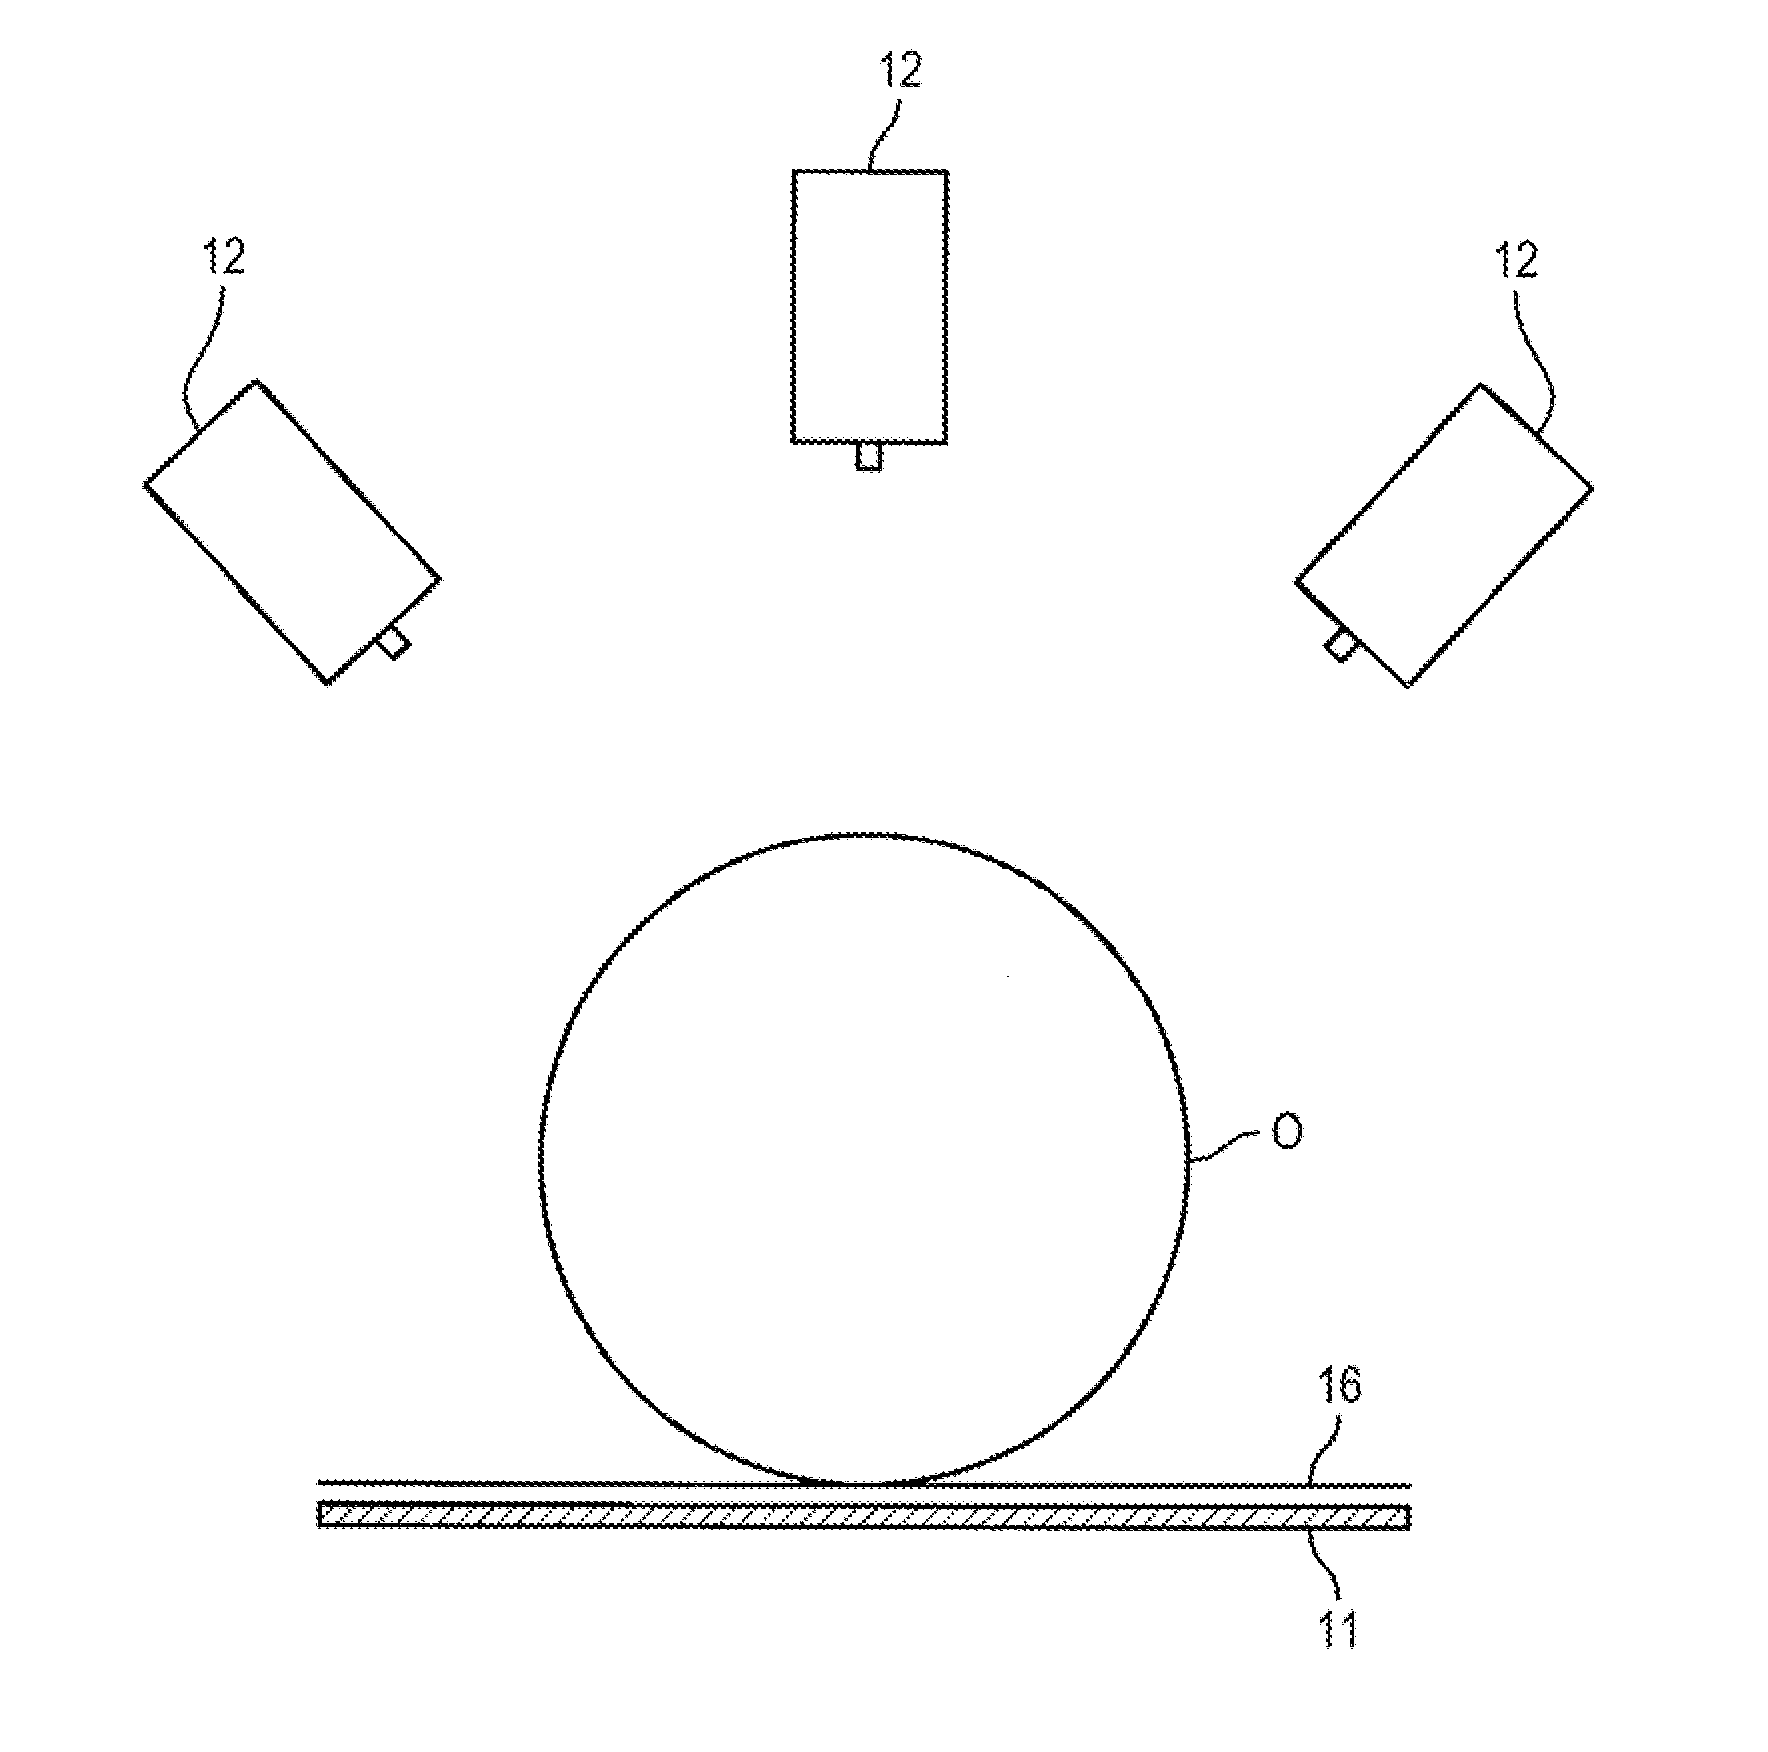 Method, system and computer program product to process a set of tomosynthesis slices